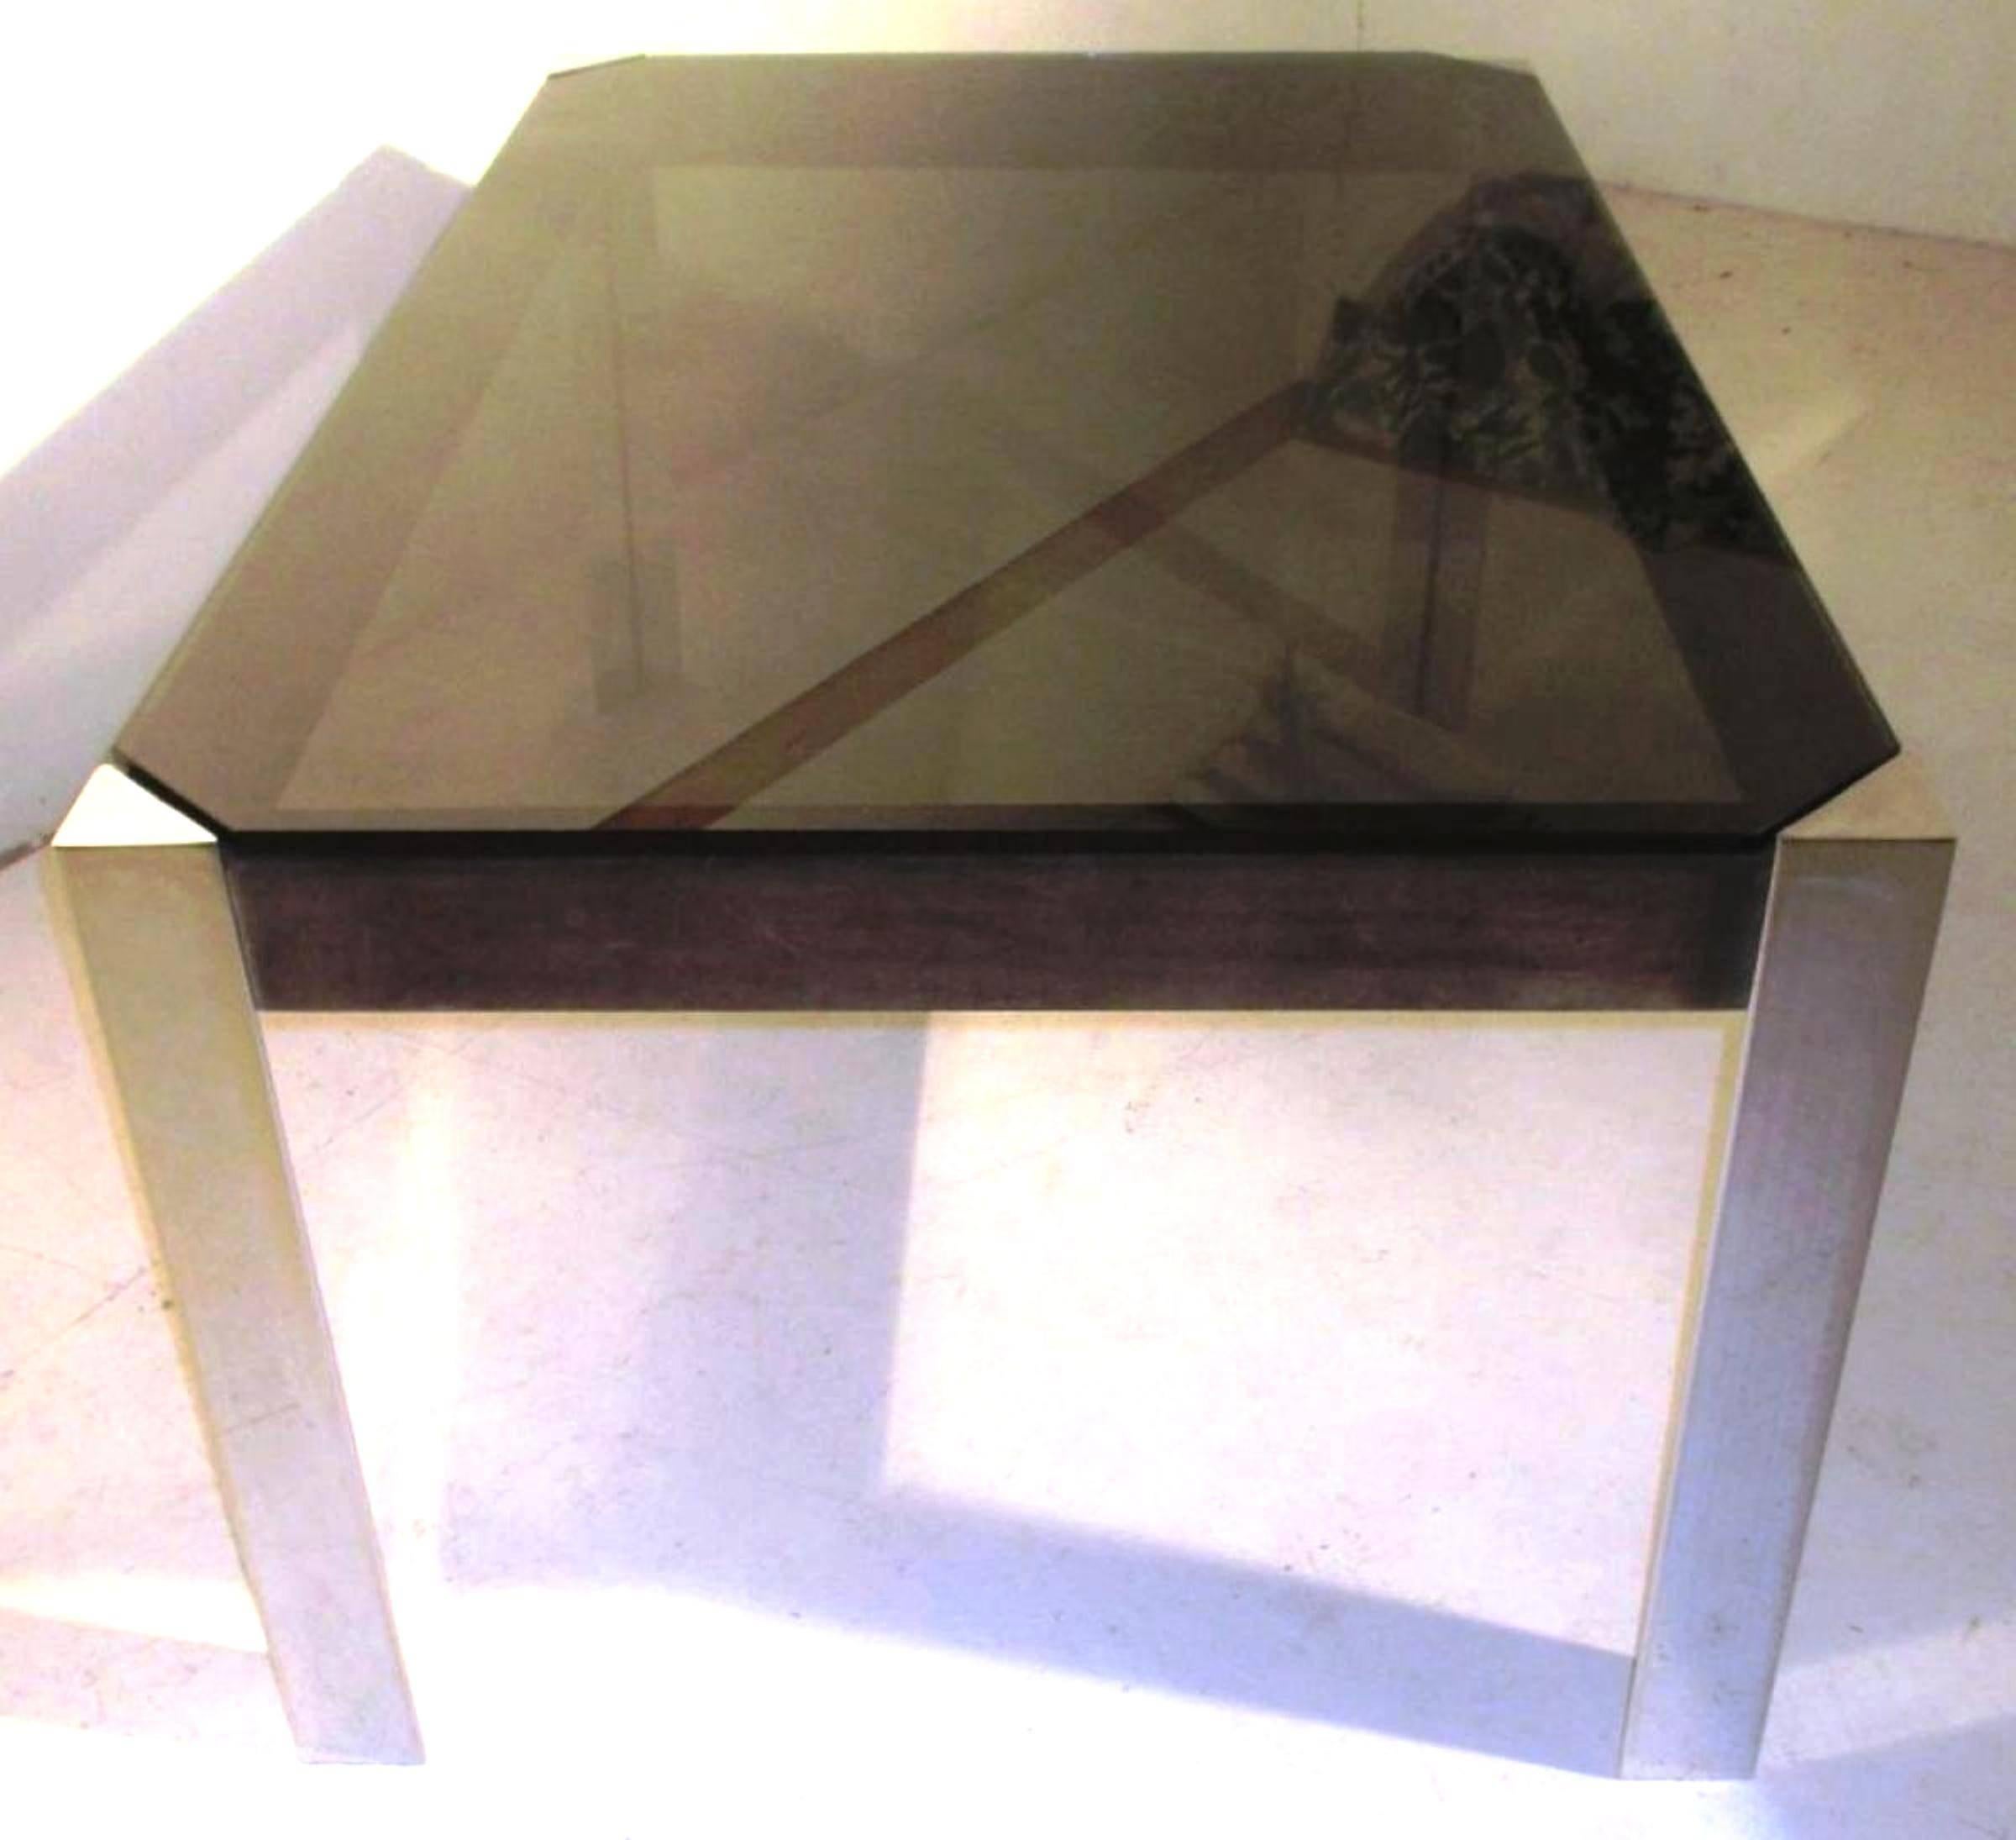 Spectacular and Rare Guido Faleschini table, desk for Hermes, France, 1970s
The triangular legs are chrome metal
The side is in nubuck / suede
smoked glass top.
Hermes commissioned some presentation furniture to Guido Faleschini in the 1970s, as